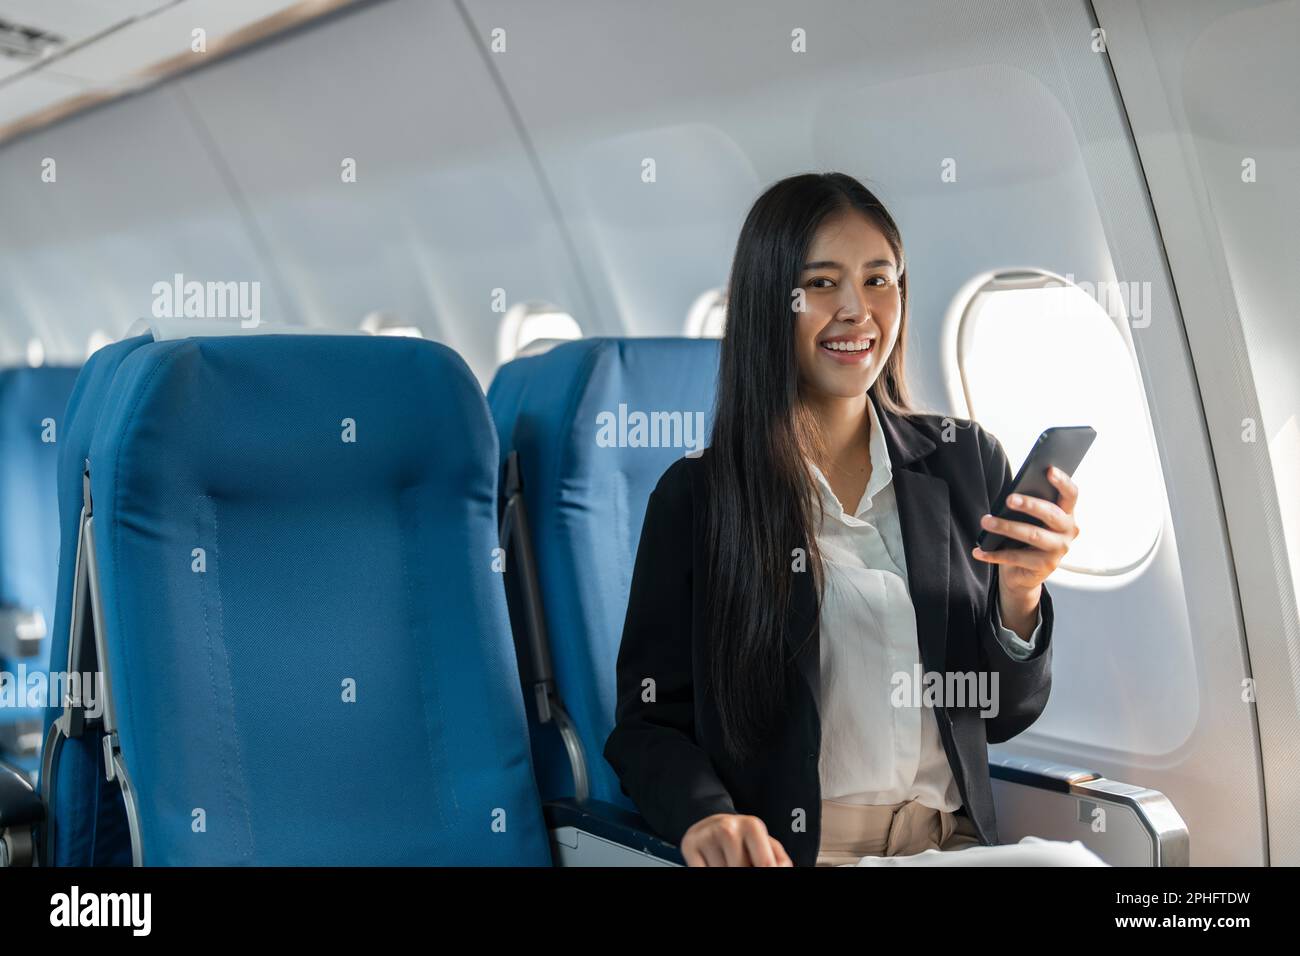 female traveler passenger sits at the window seat in economy class, using his smartphone Stock Photo